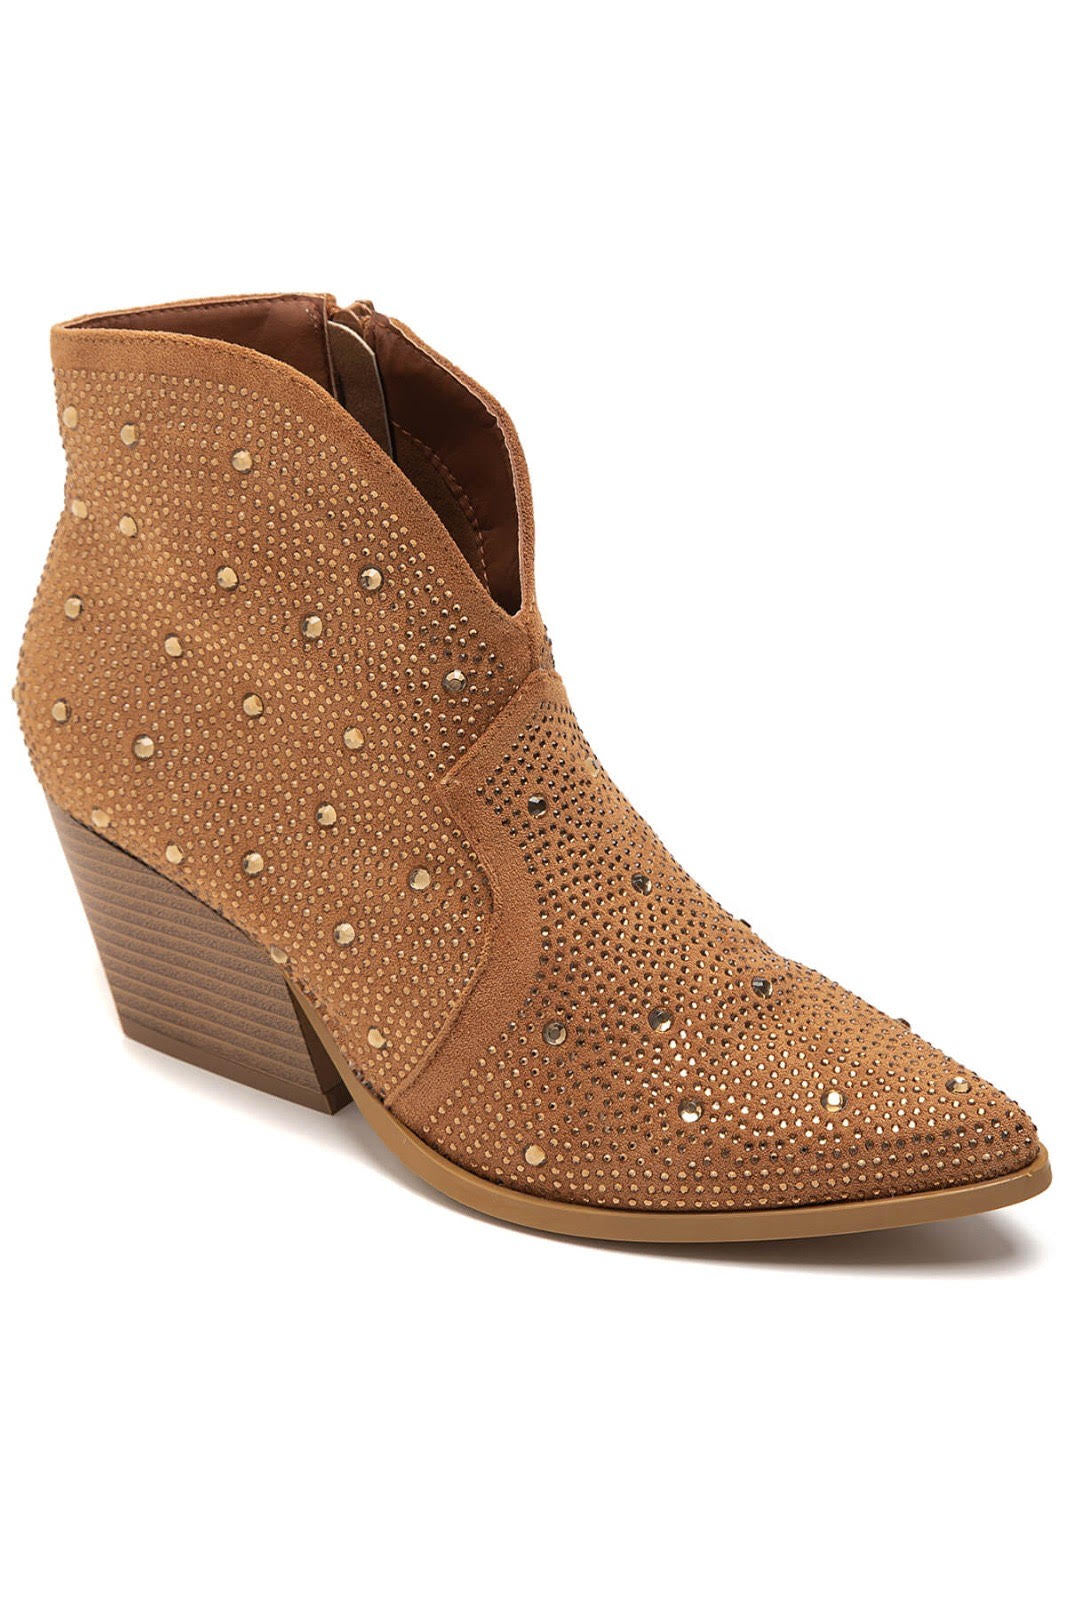 Camel Encrusted Tammy Western Style Boots